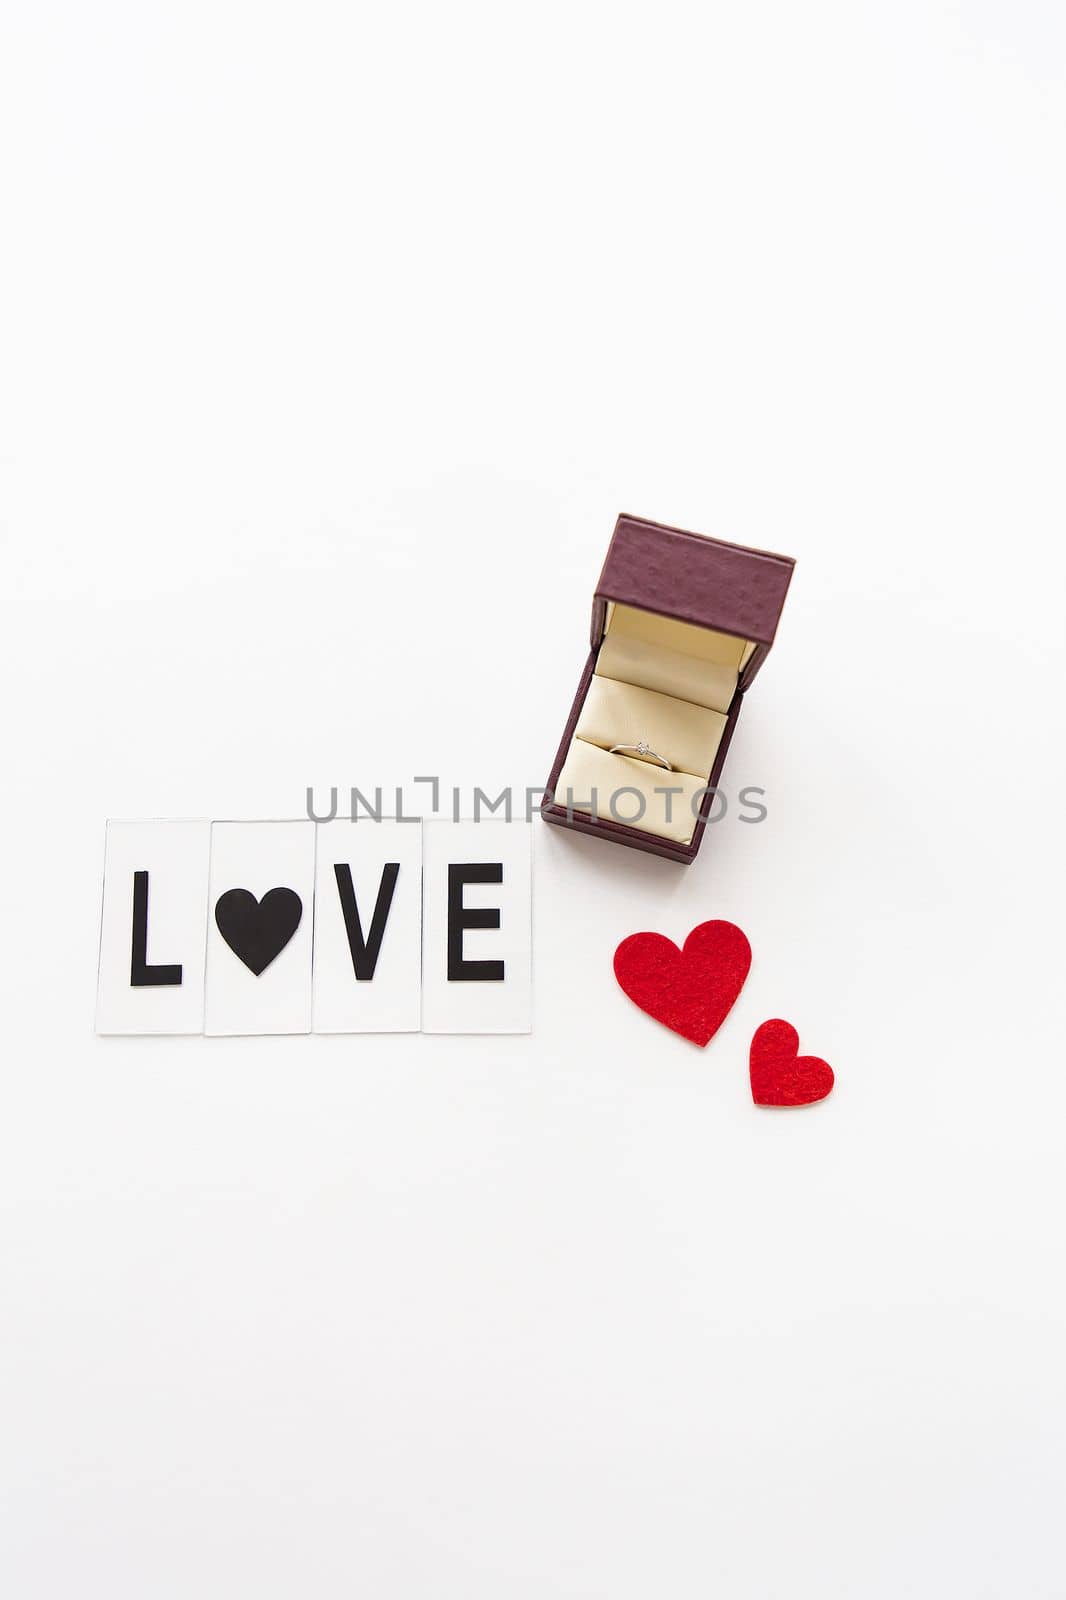 Beautiful inscription love on a white background together with a ring in a box. Marriage proposals